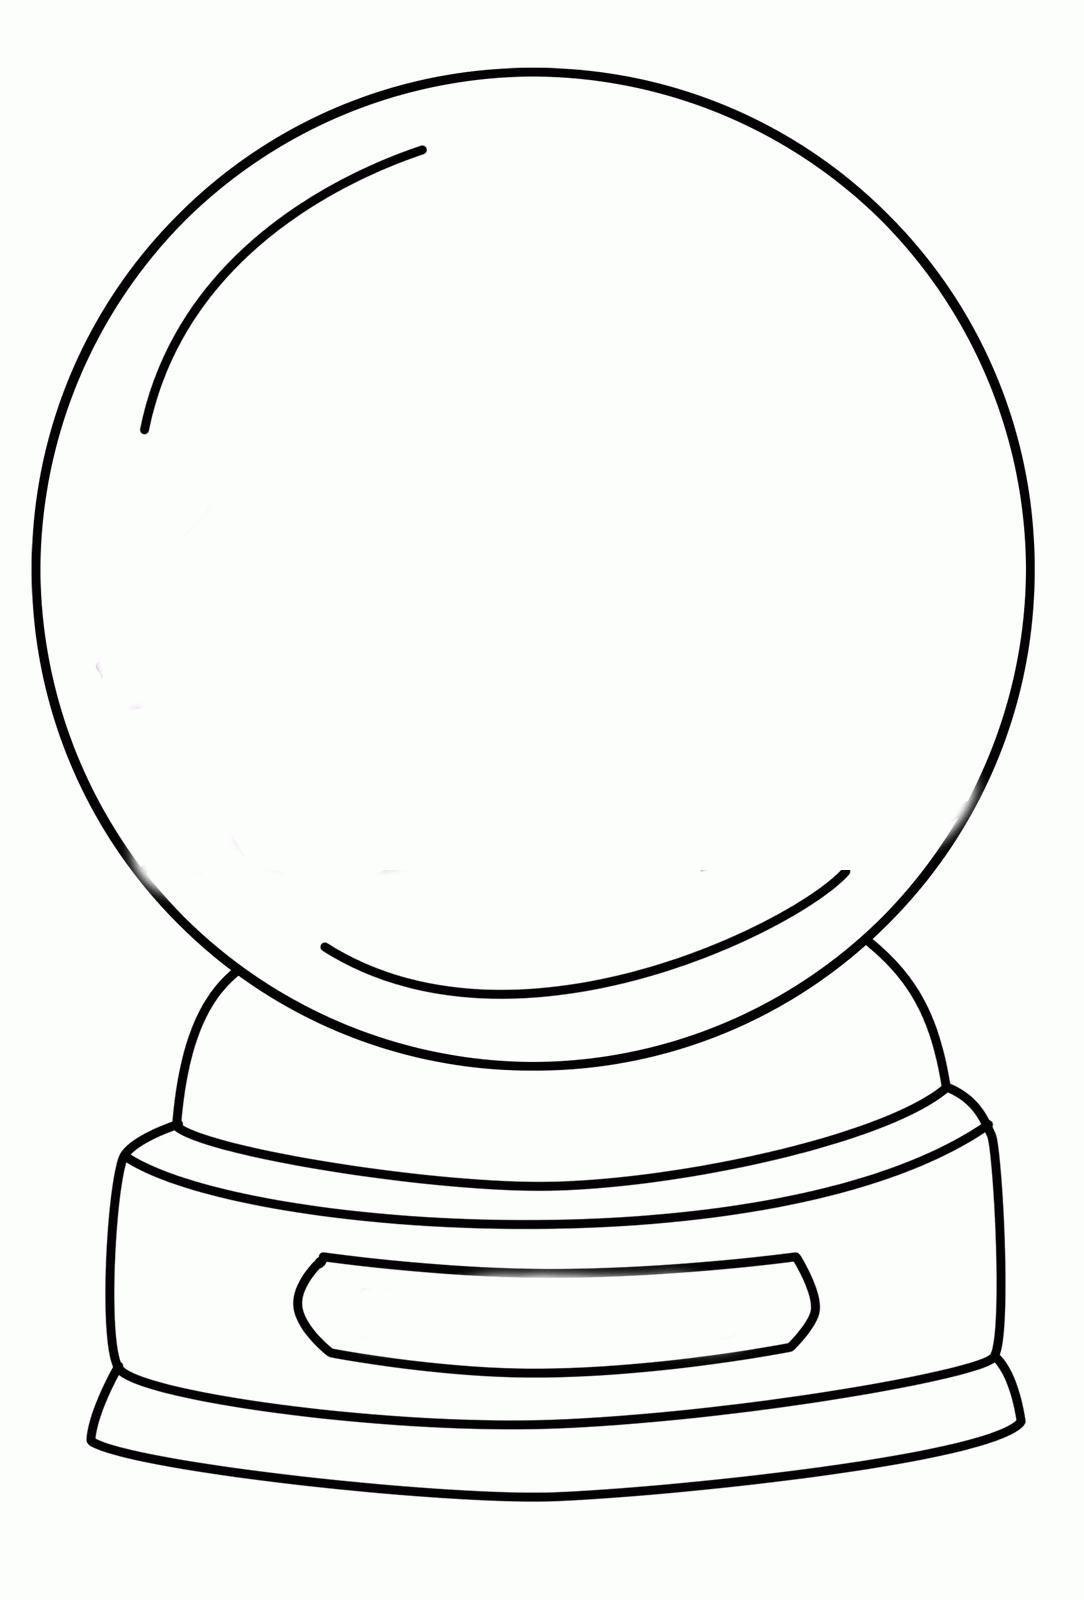 snowglobe-coloring-pages-gallery